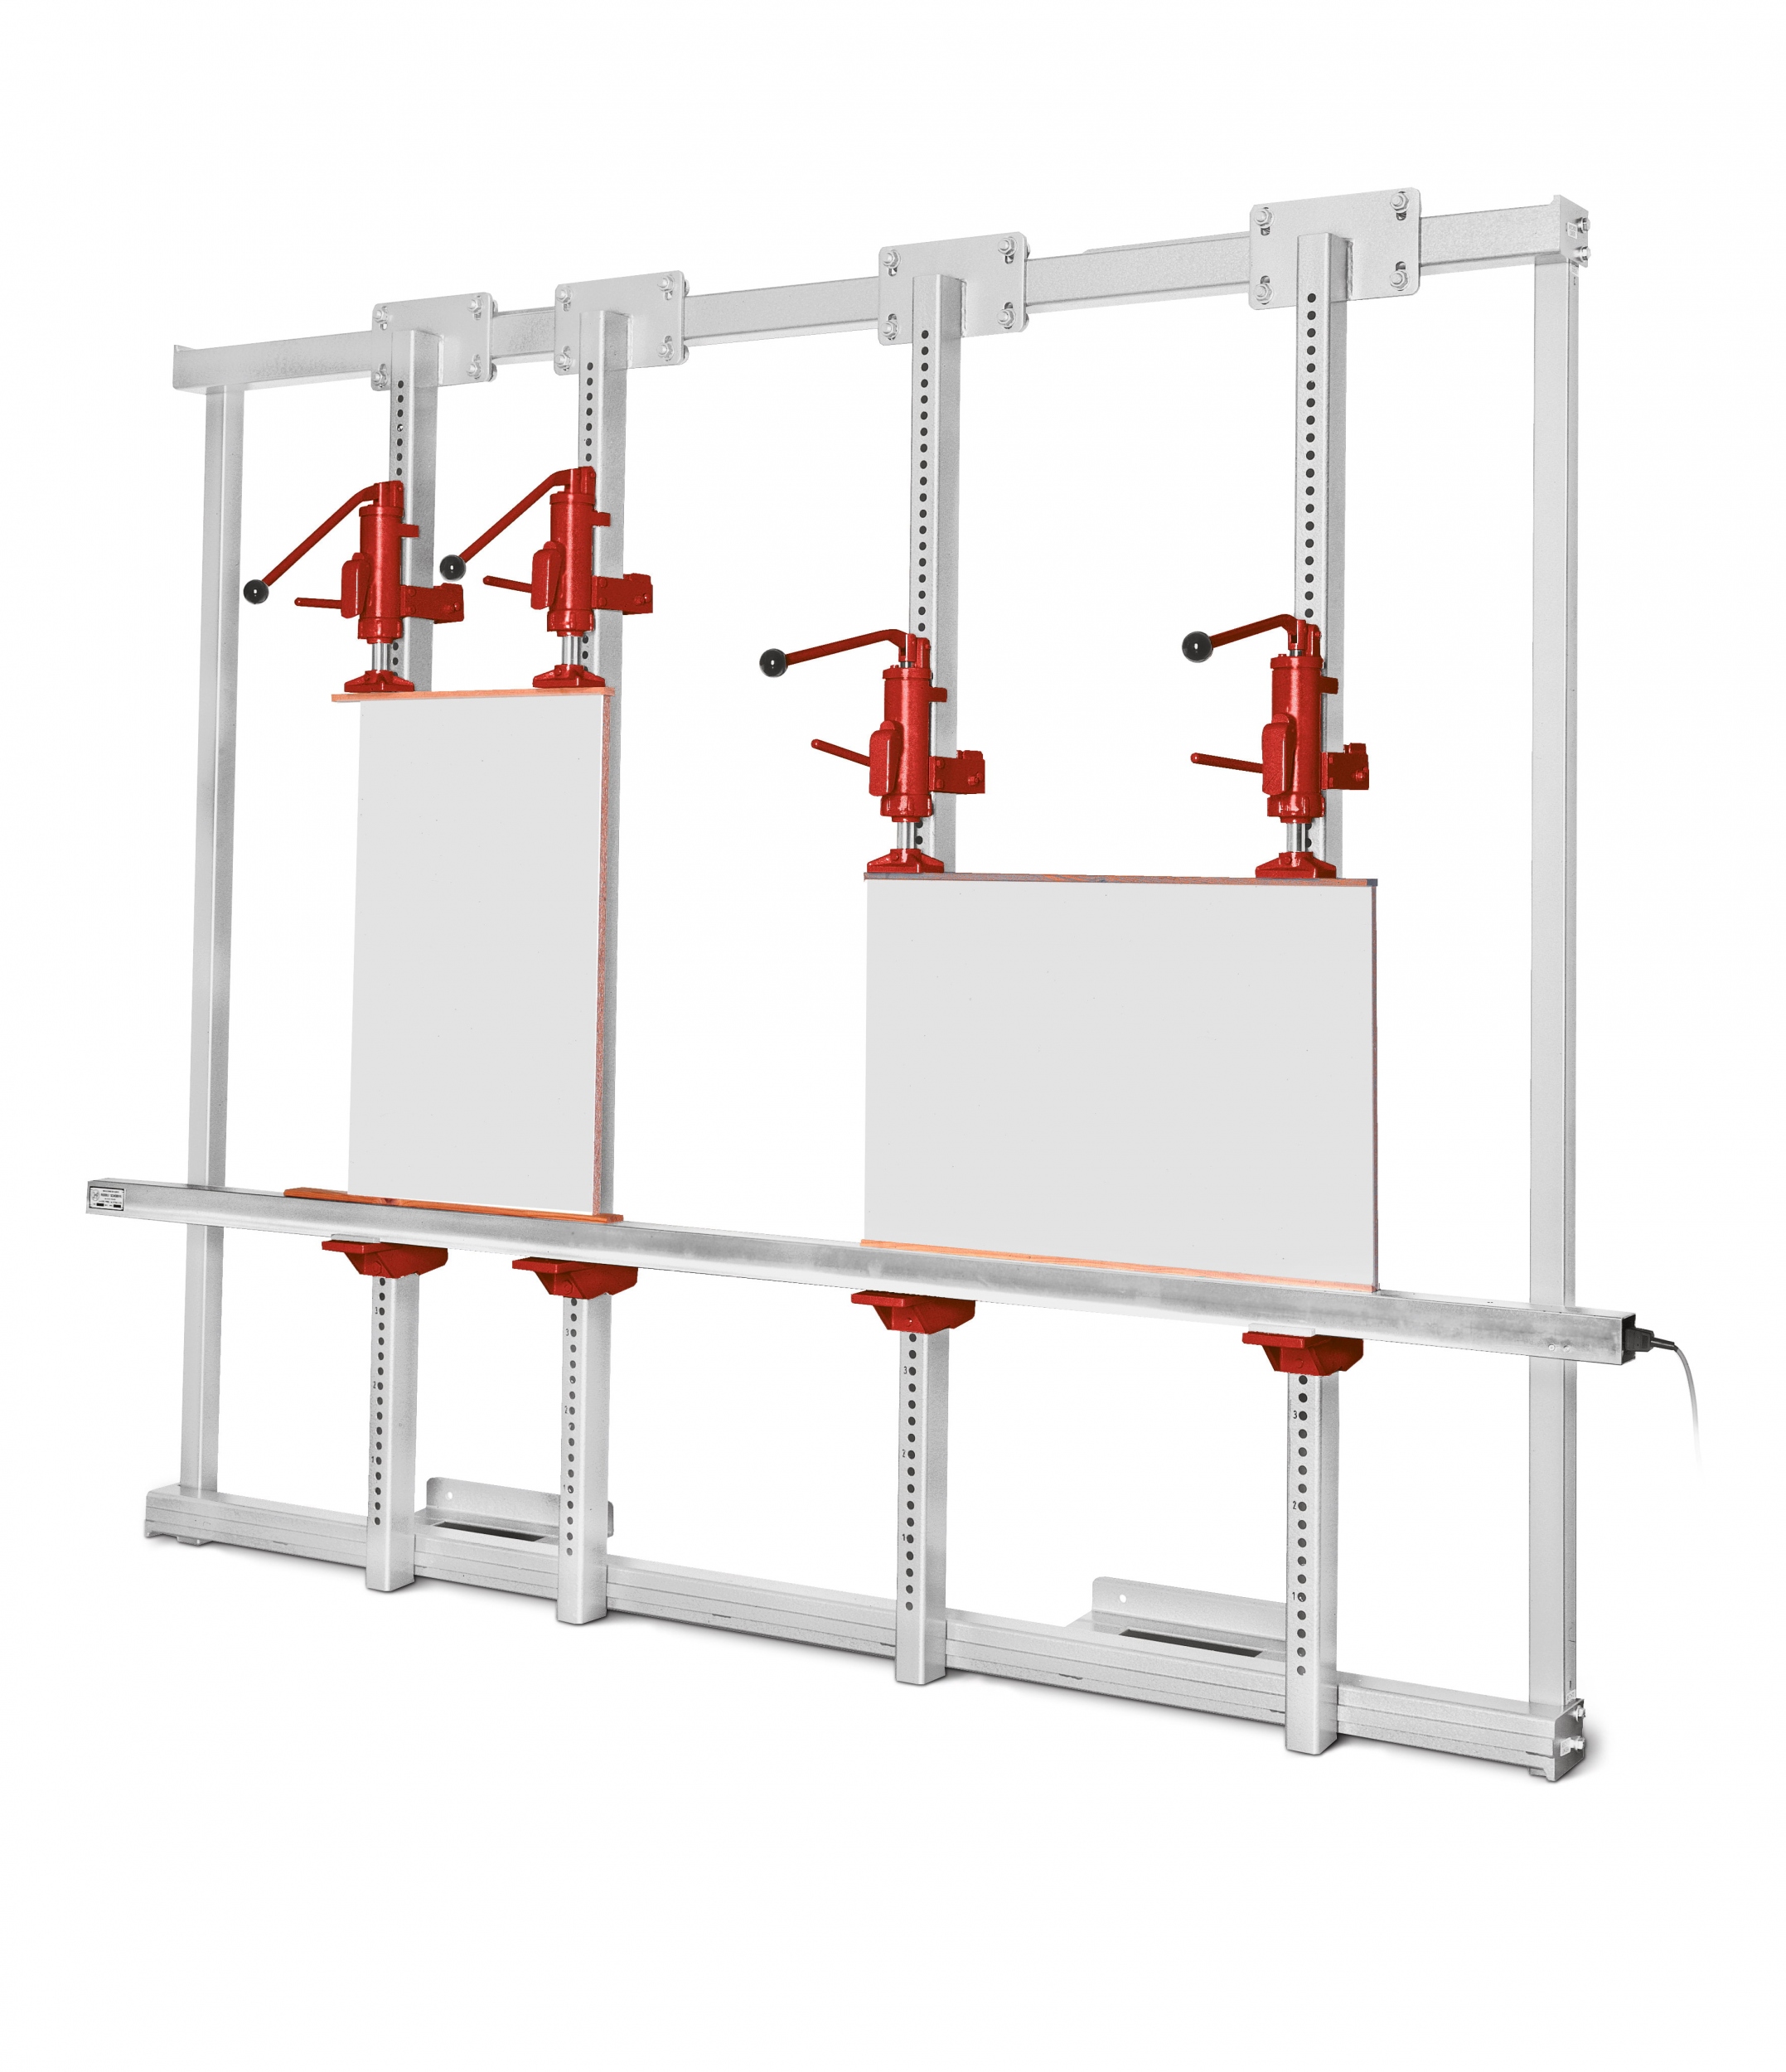 Wall-mounted gluing stand with heating ruler